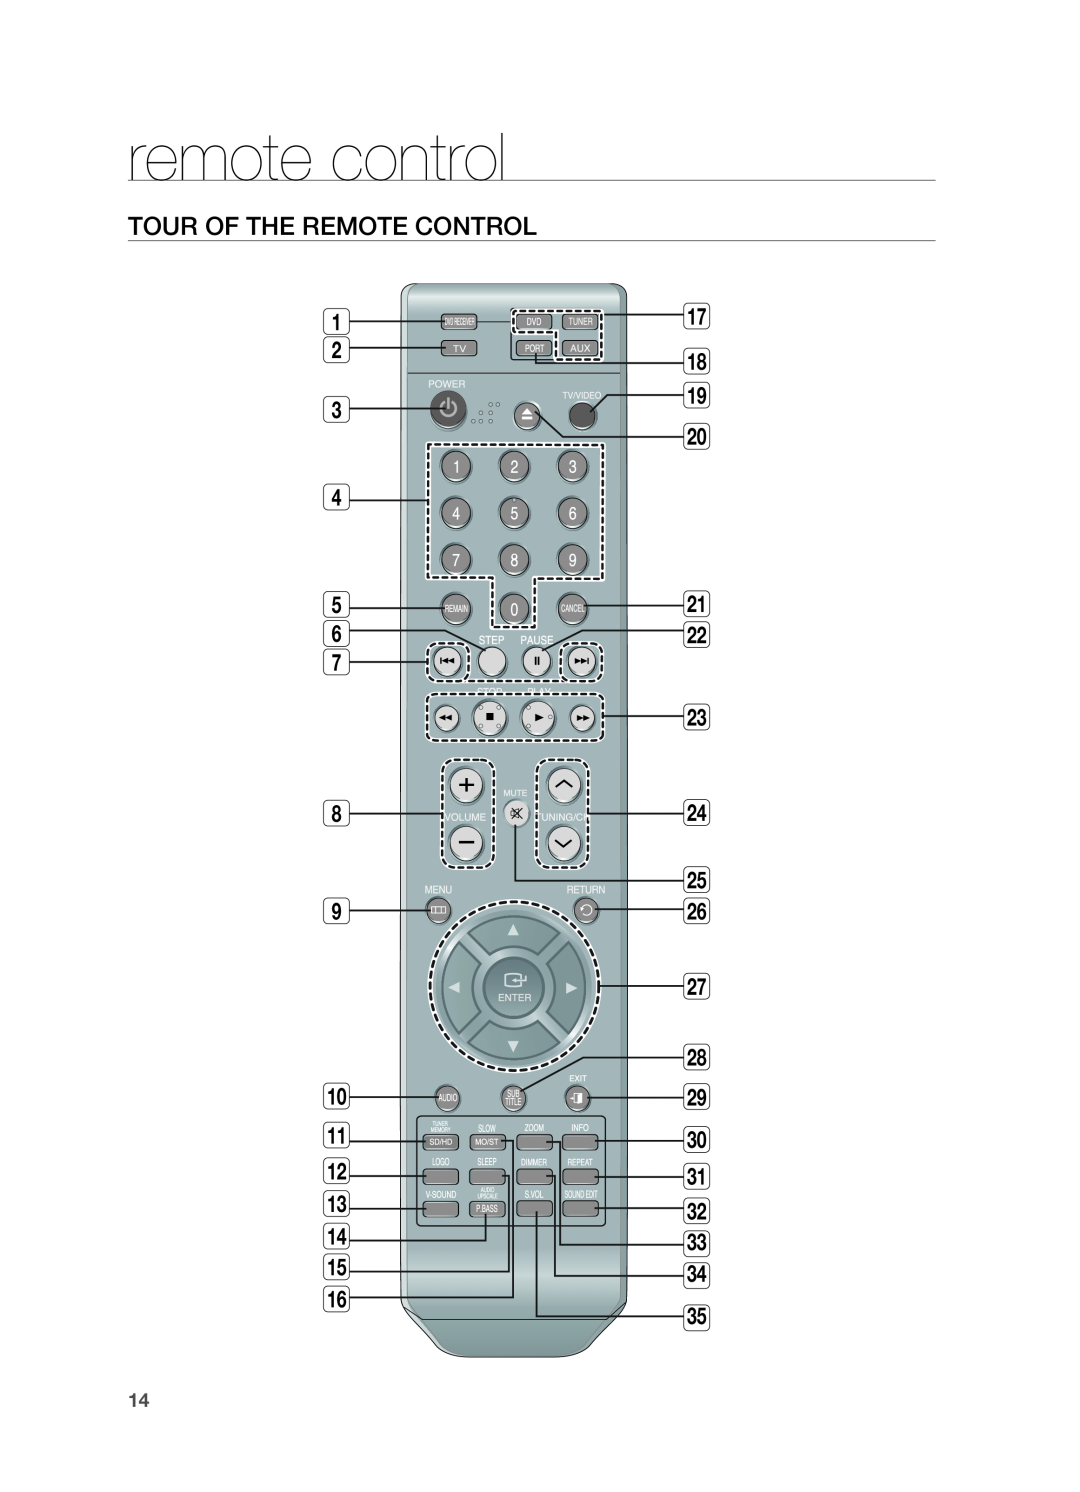 Sony HT-X810 user manual Tour of the Remote Control, remote control 